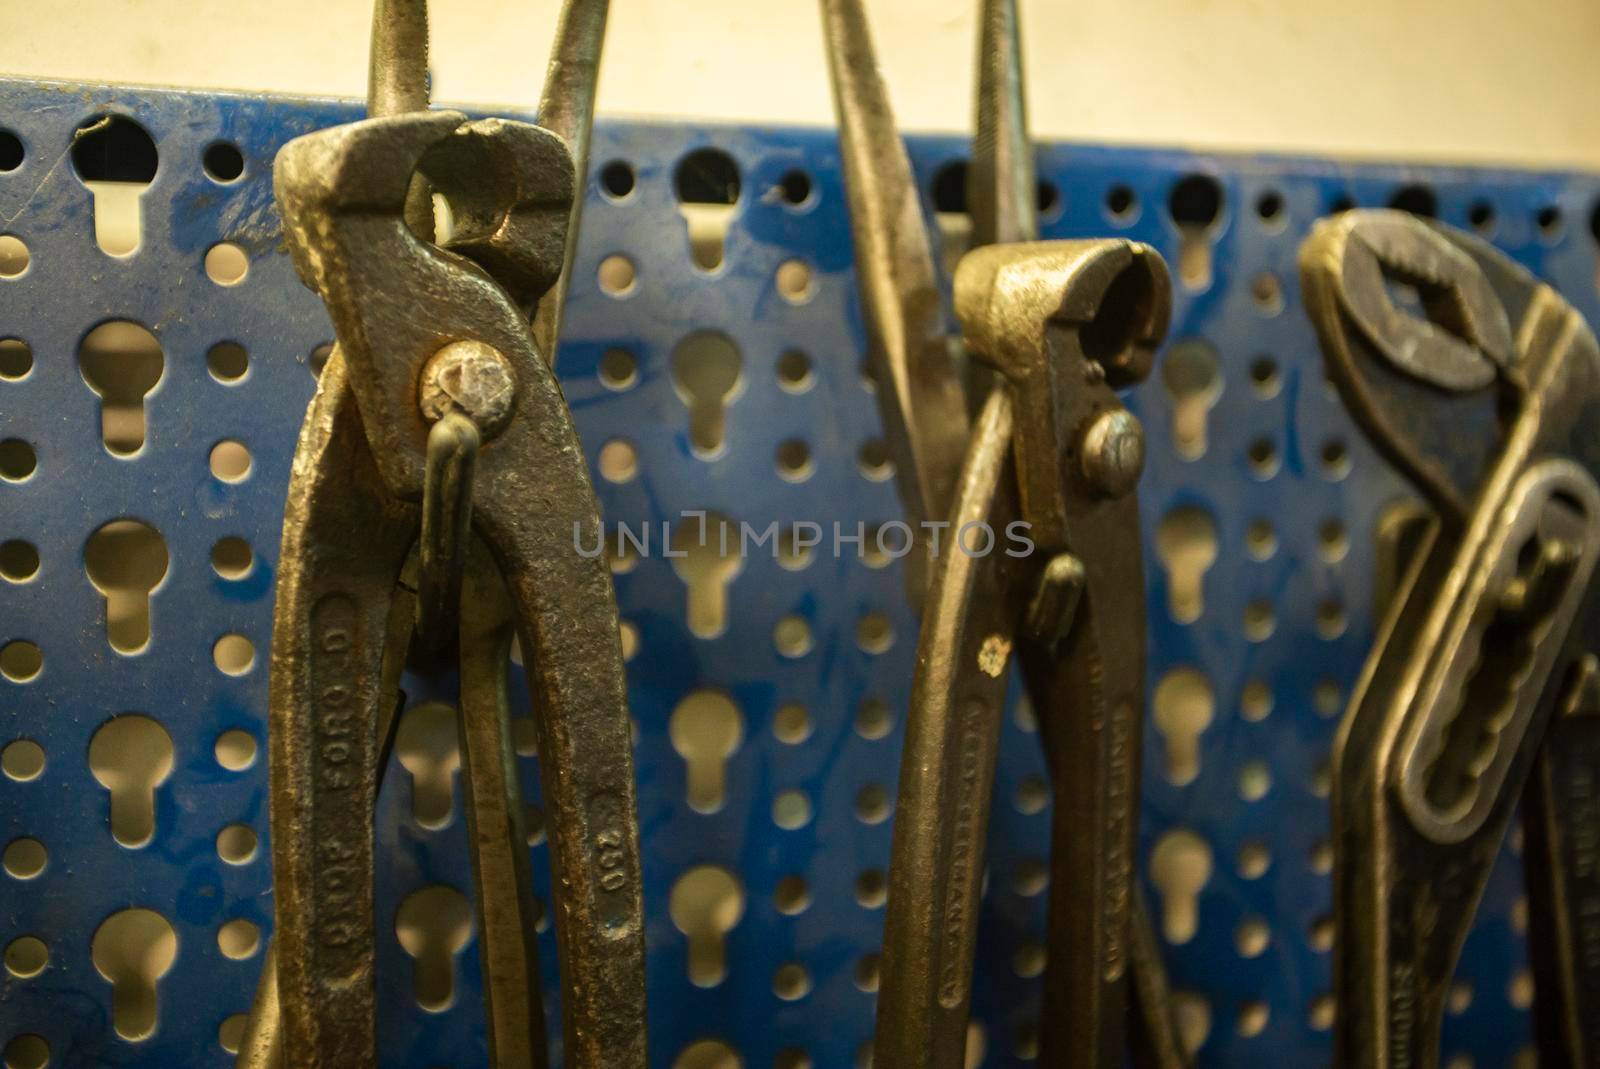 MILAN, ITALY 28 MARCH 2021: Tools hanging in the workshop